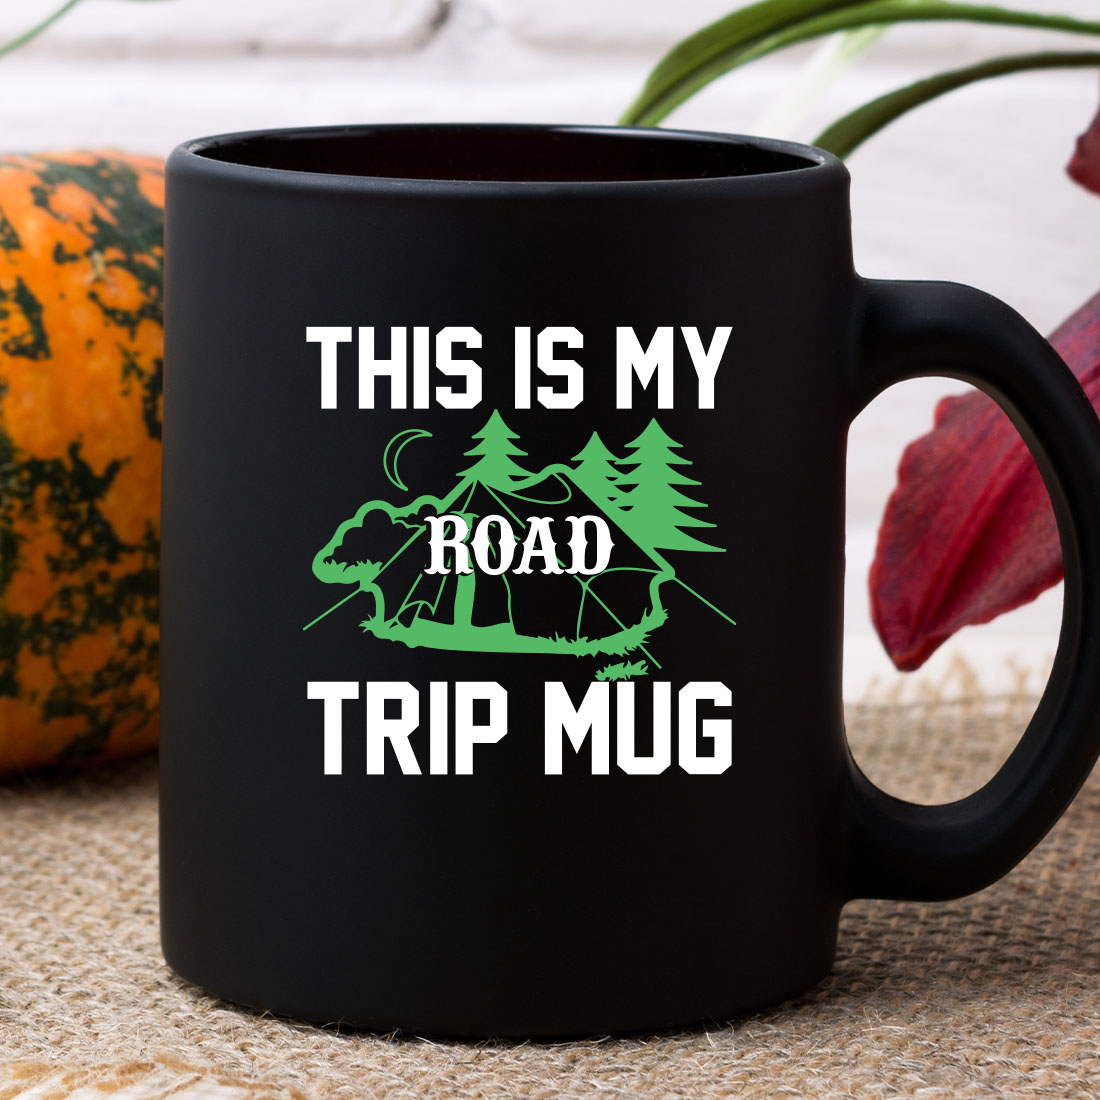 This is my road trip mug on a table.